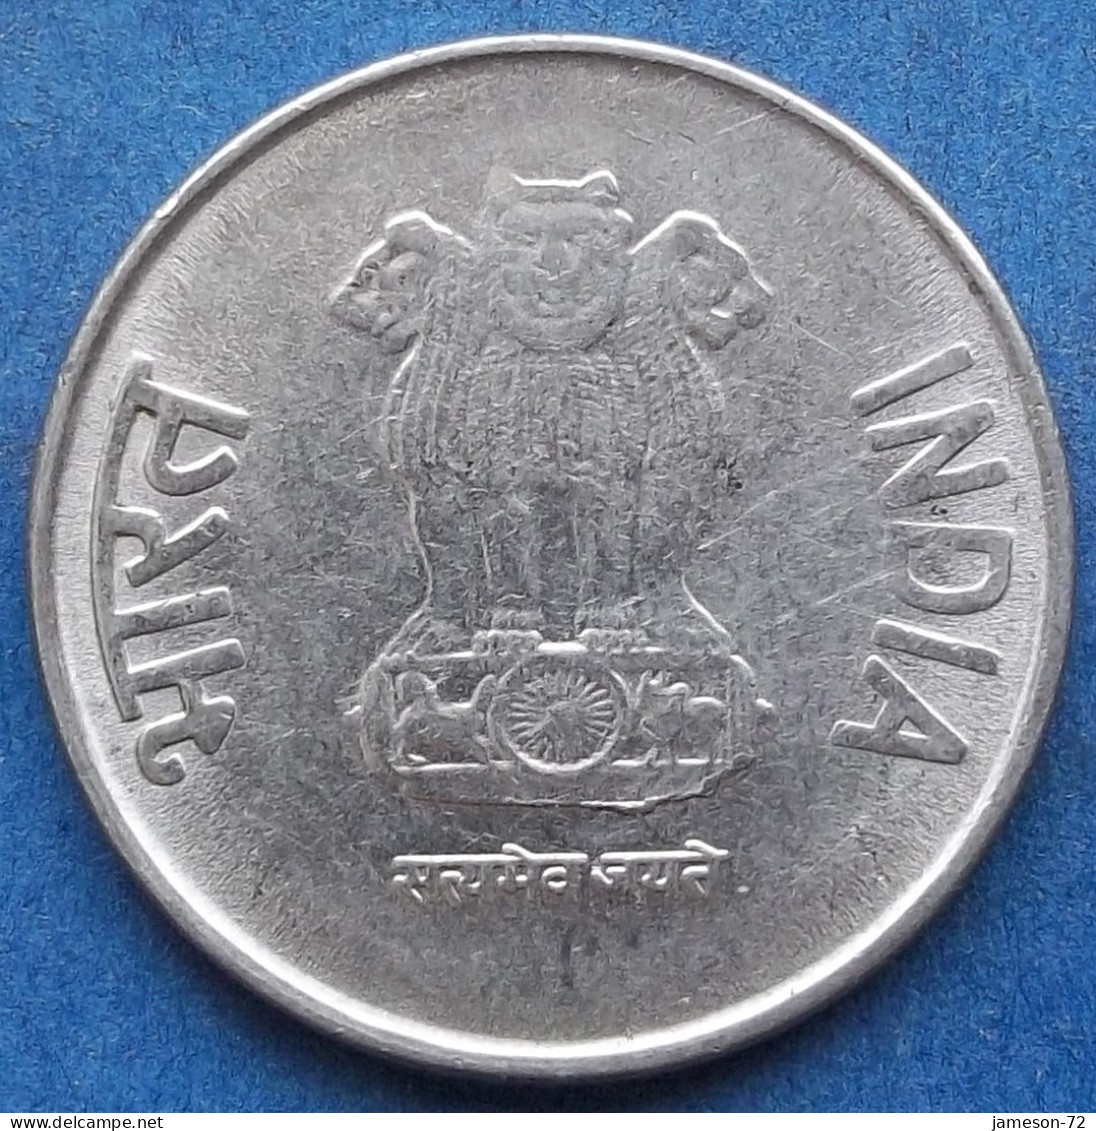 INDIA - 1 Rupee 2015 "Lotus Flowers" KM# 394 Republic Decimal Coinage (1957) - Edelweiss Coins - Georgien